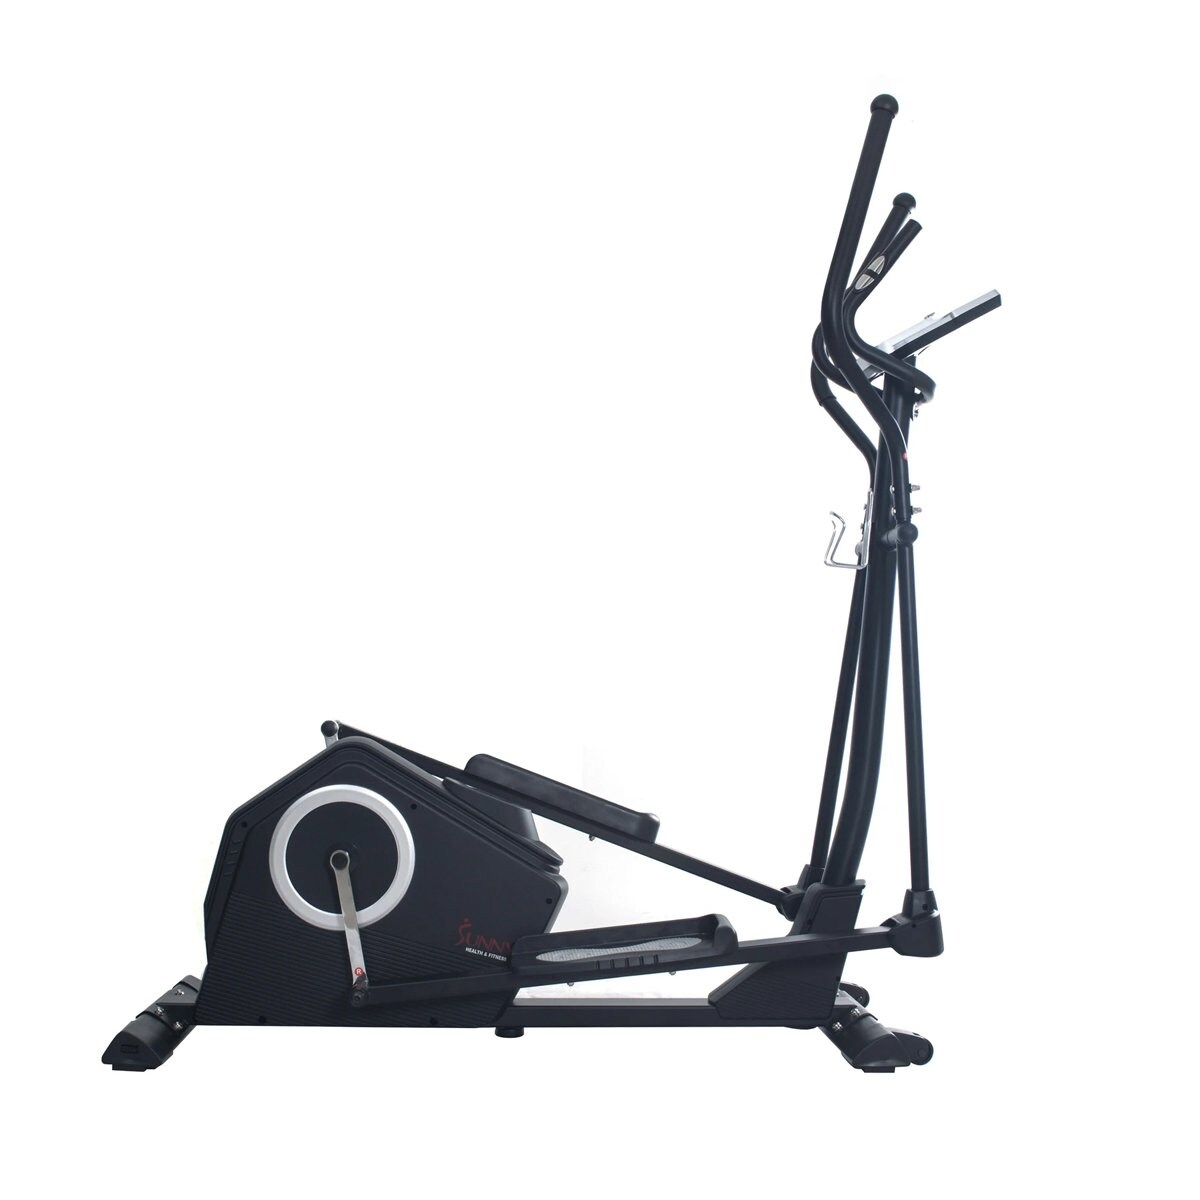 Sunny Health & Fitness Magnetic Resistance Cross-trainer Elliptical at